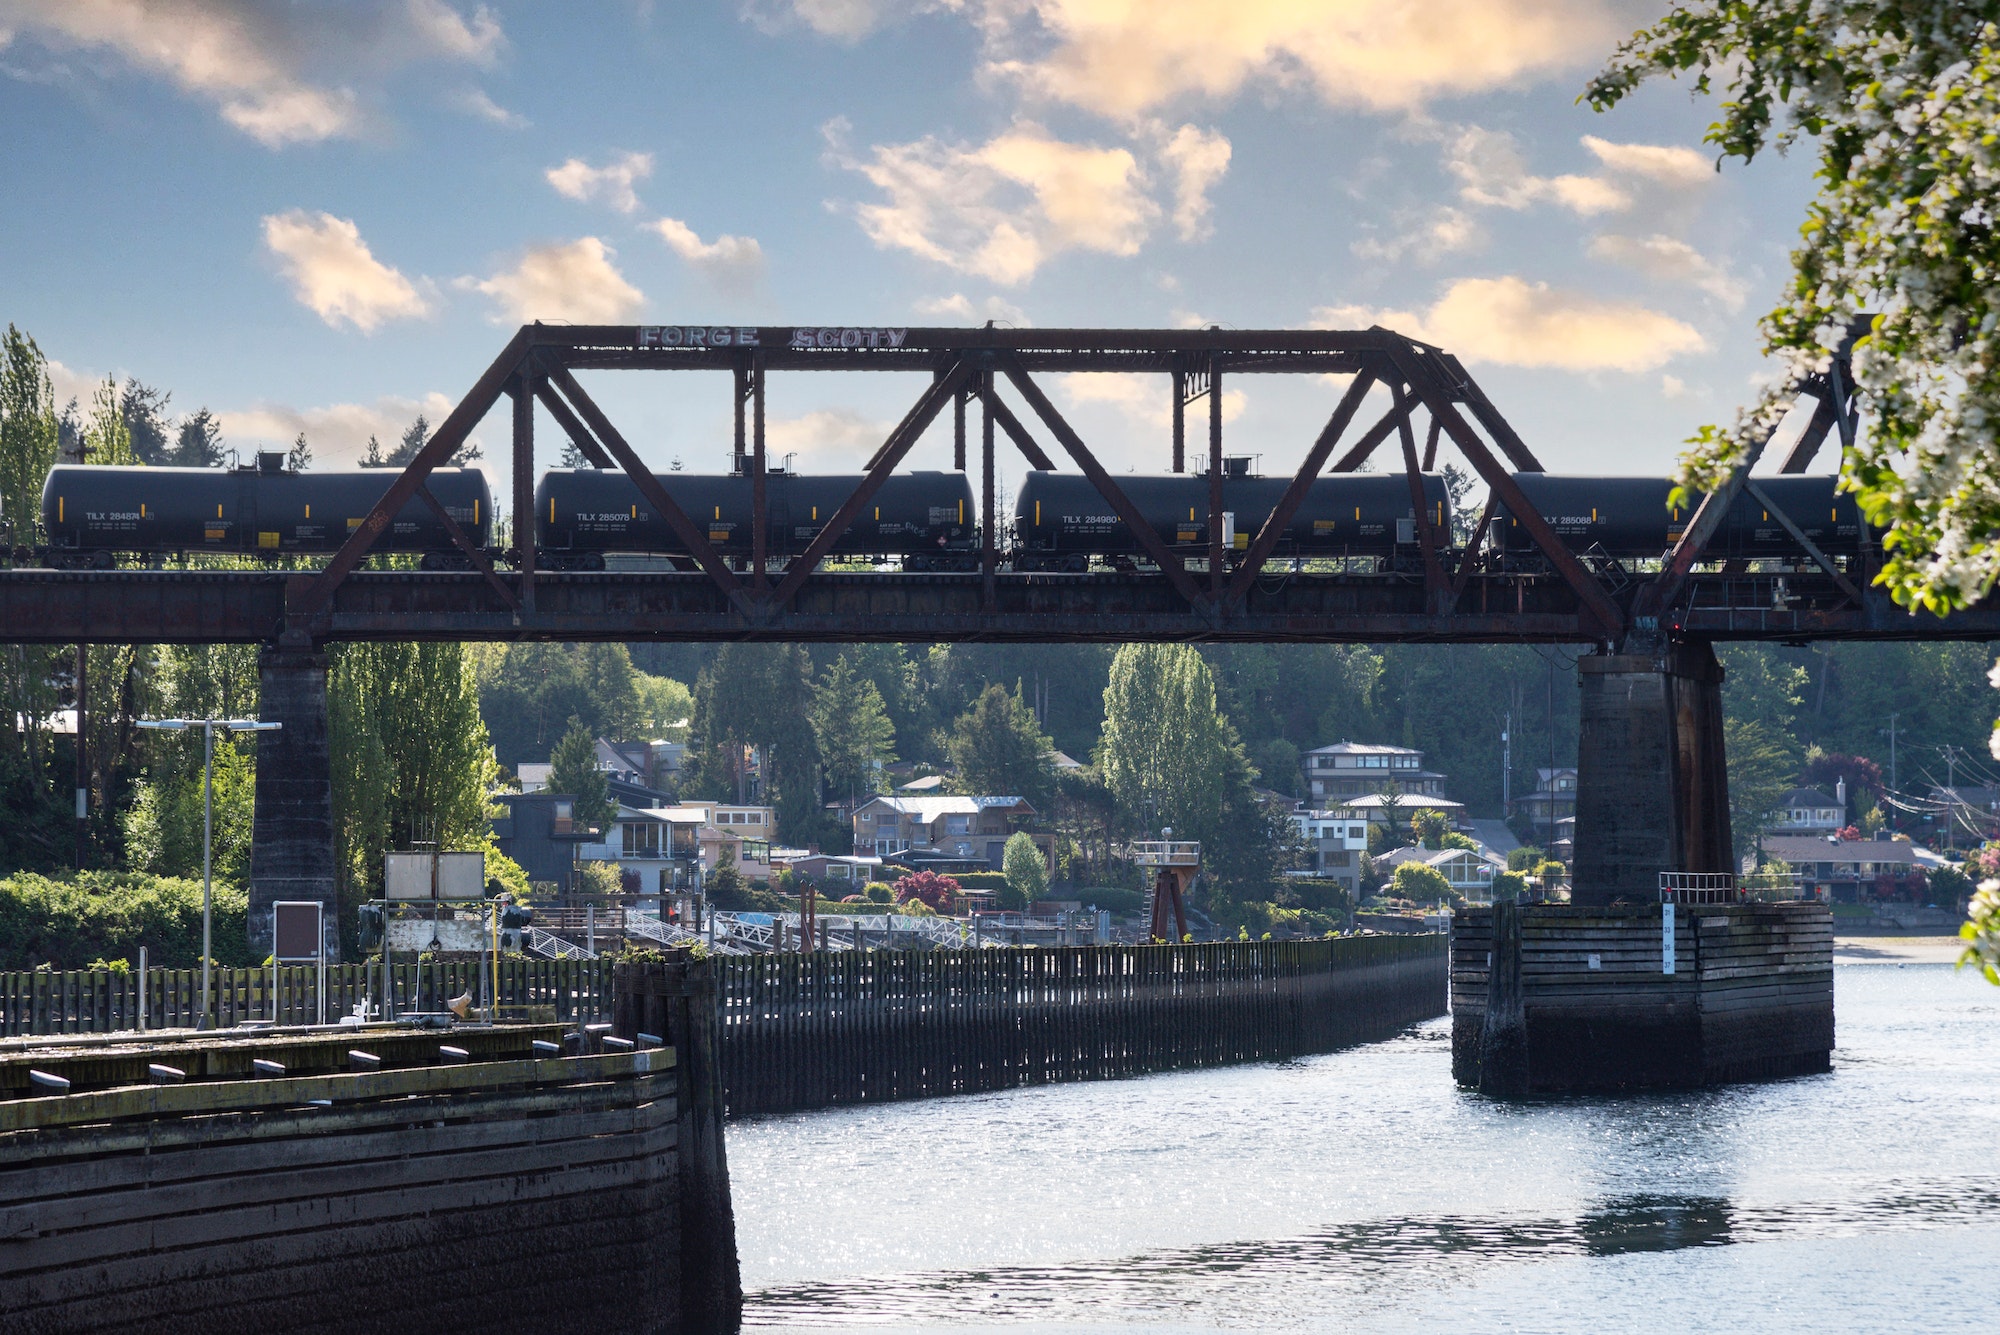 Oil liquid container train cars passing over a waterway on a bridge.